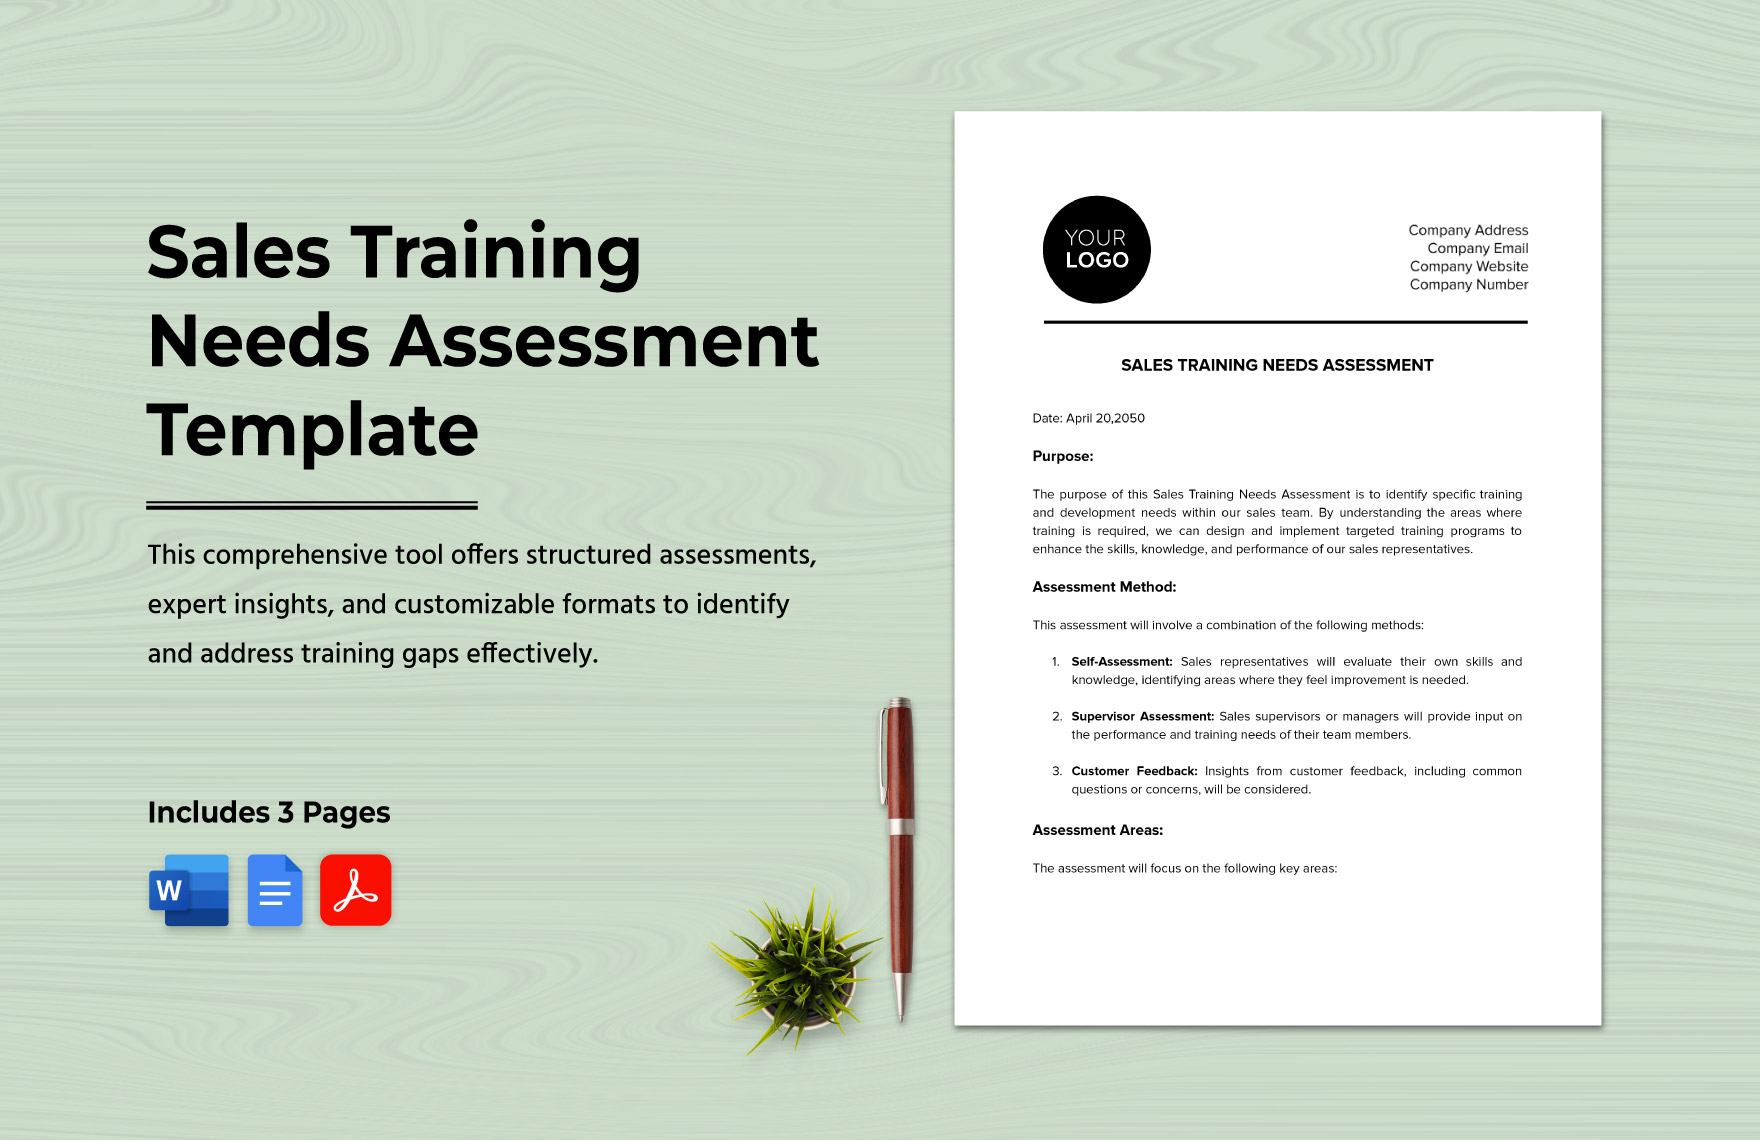 Sales Training Needs Assessment Template in Word, Google Docs, PDF